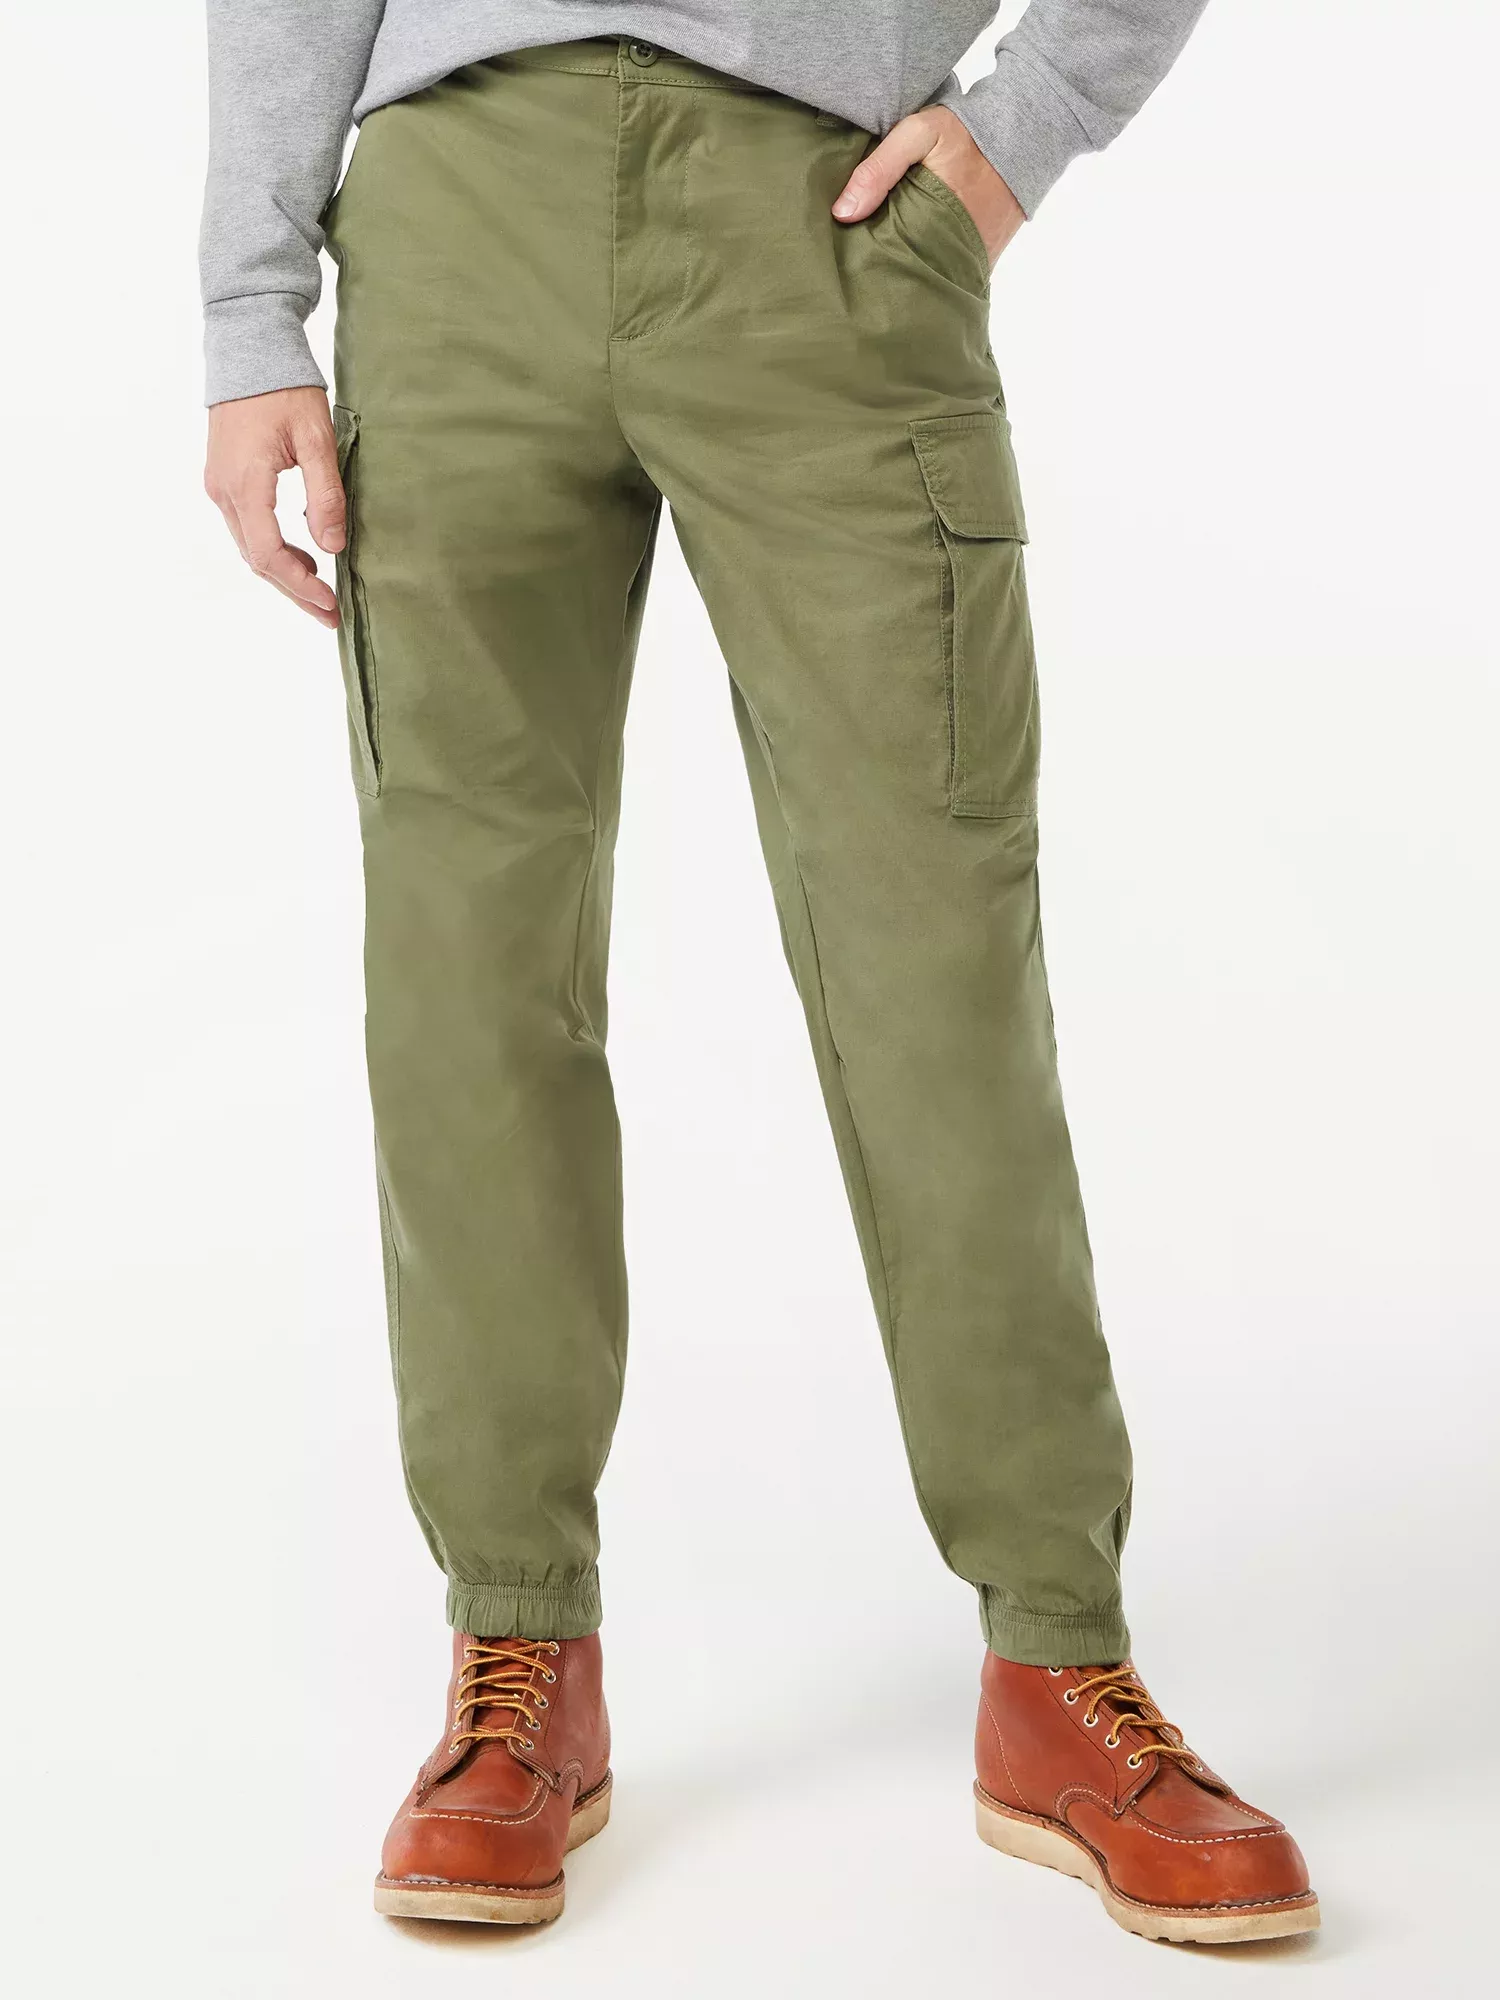 It's time for cargo pants, , $30, purchasing in black :  r/likeREALfashion